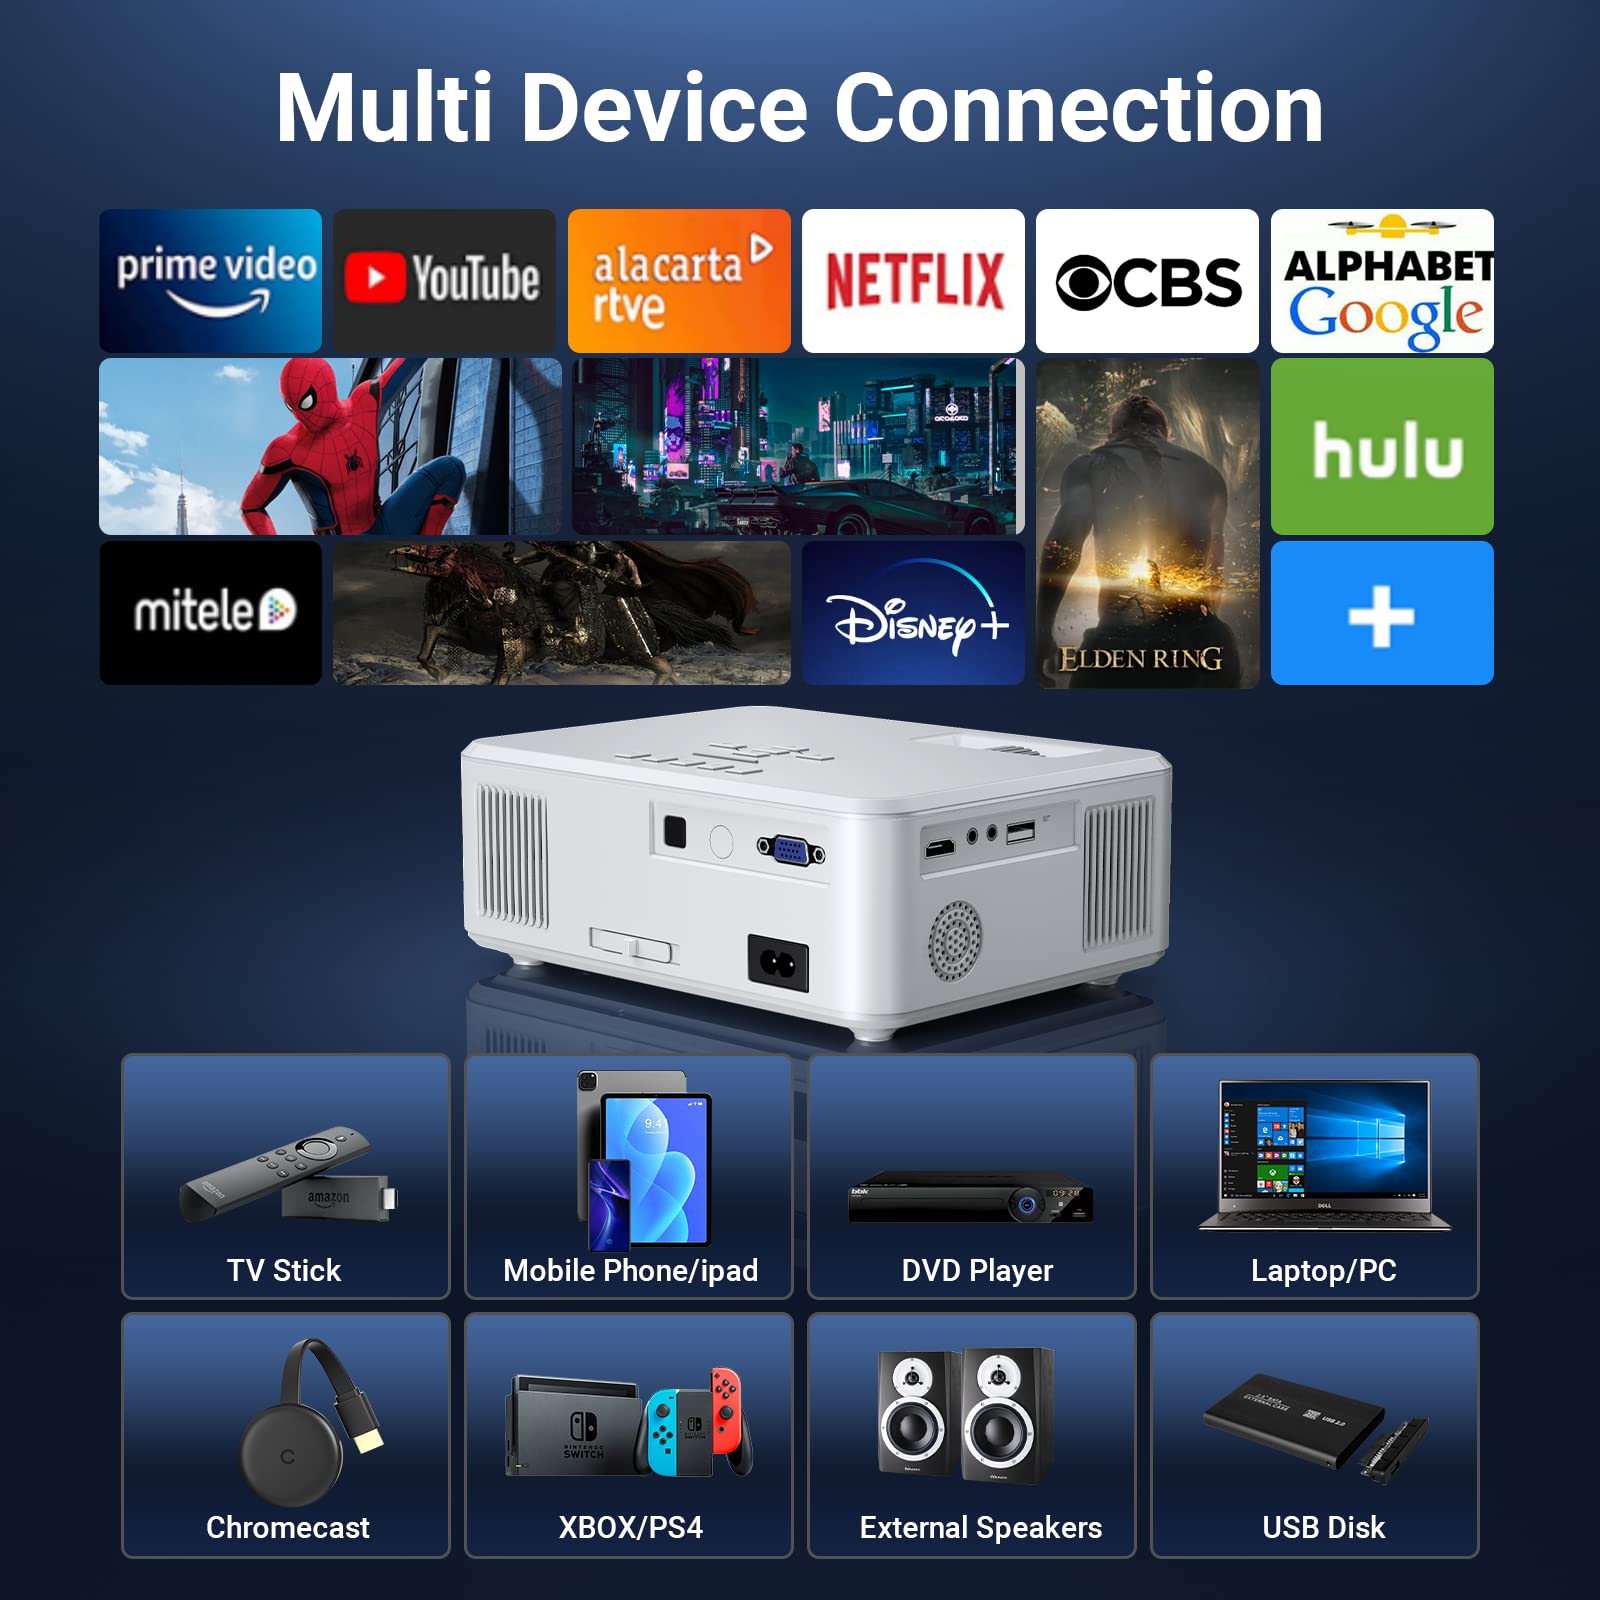 Projector with WiFi and Bluetooth, Pericat 5G WiFi, Native 1080P/12000